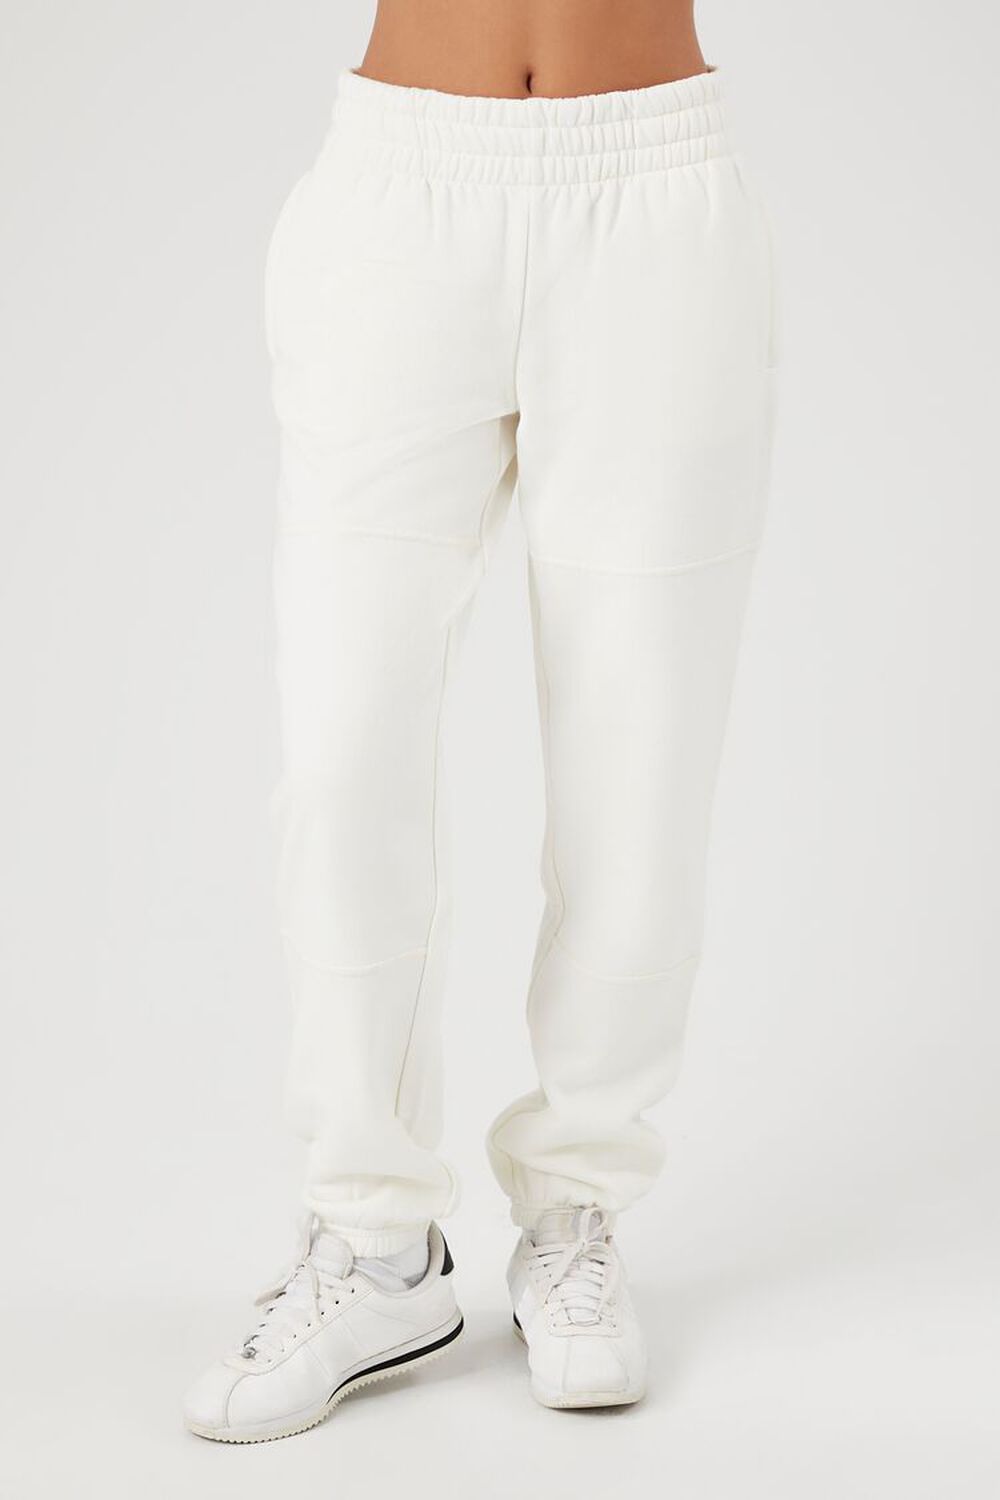 New With Tags Forever 21 Active Fleece Joggers Vanilla Pockets